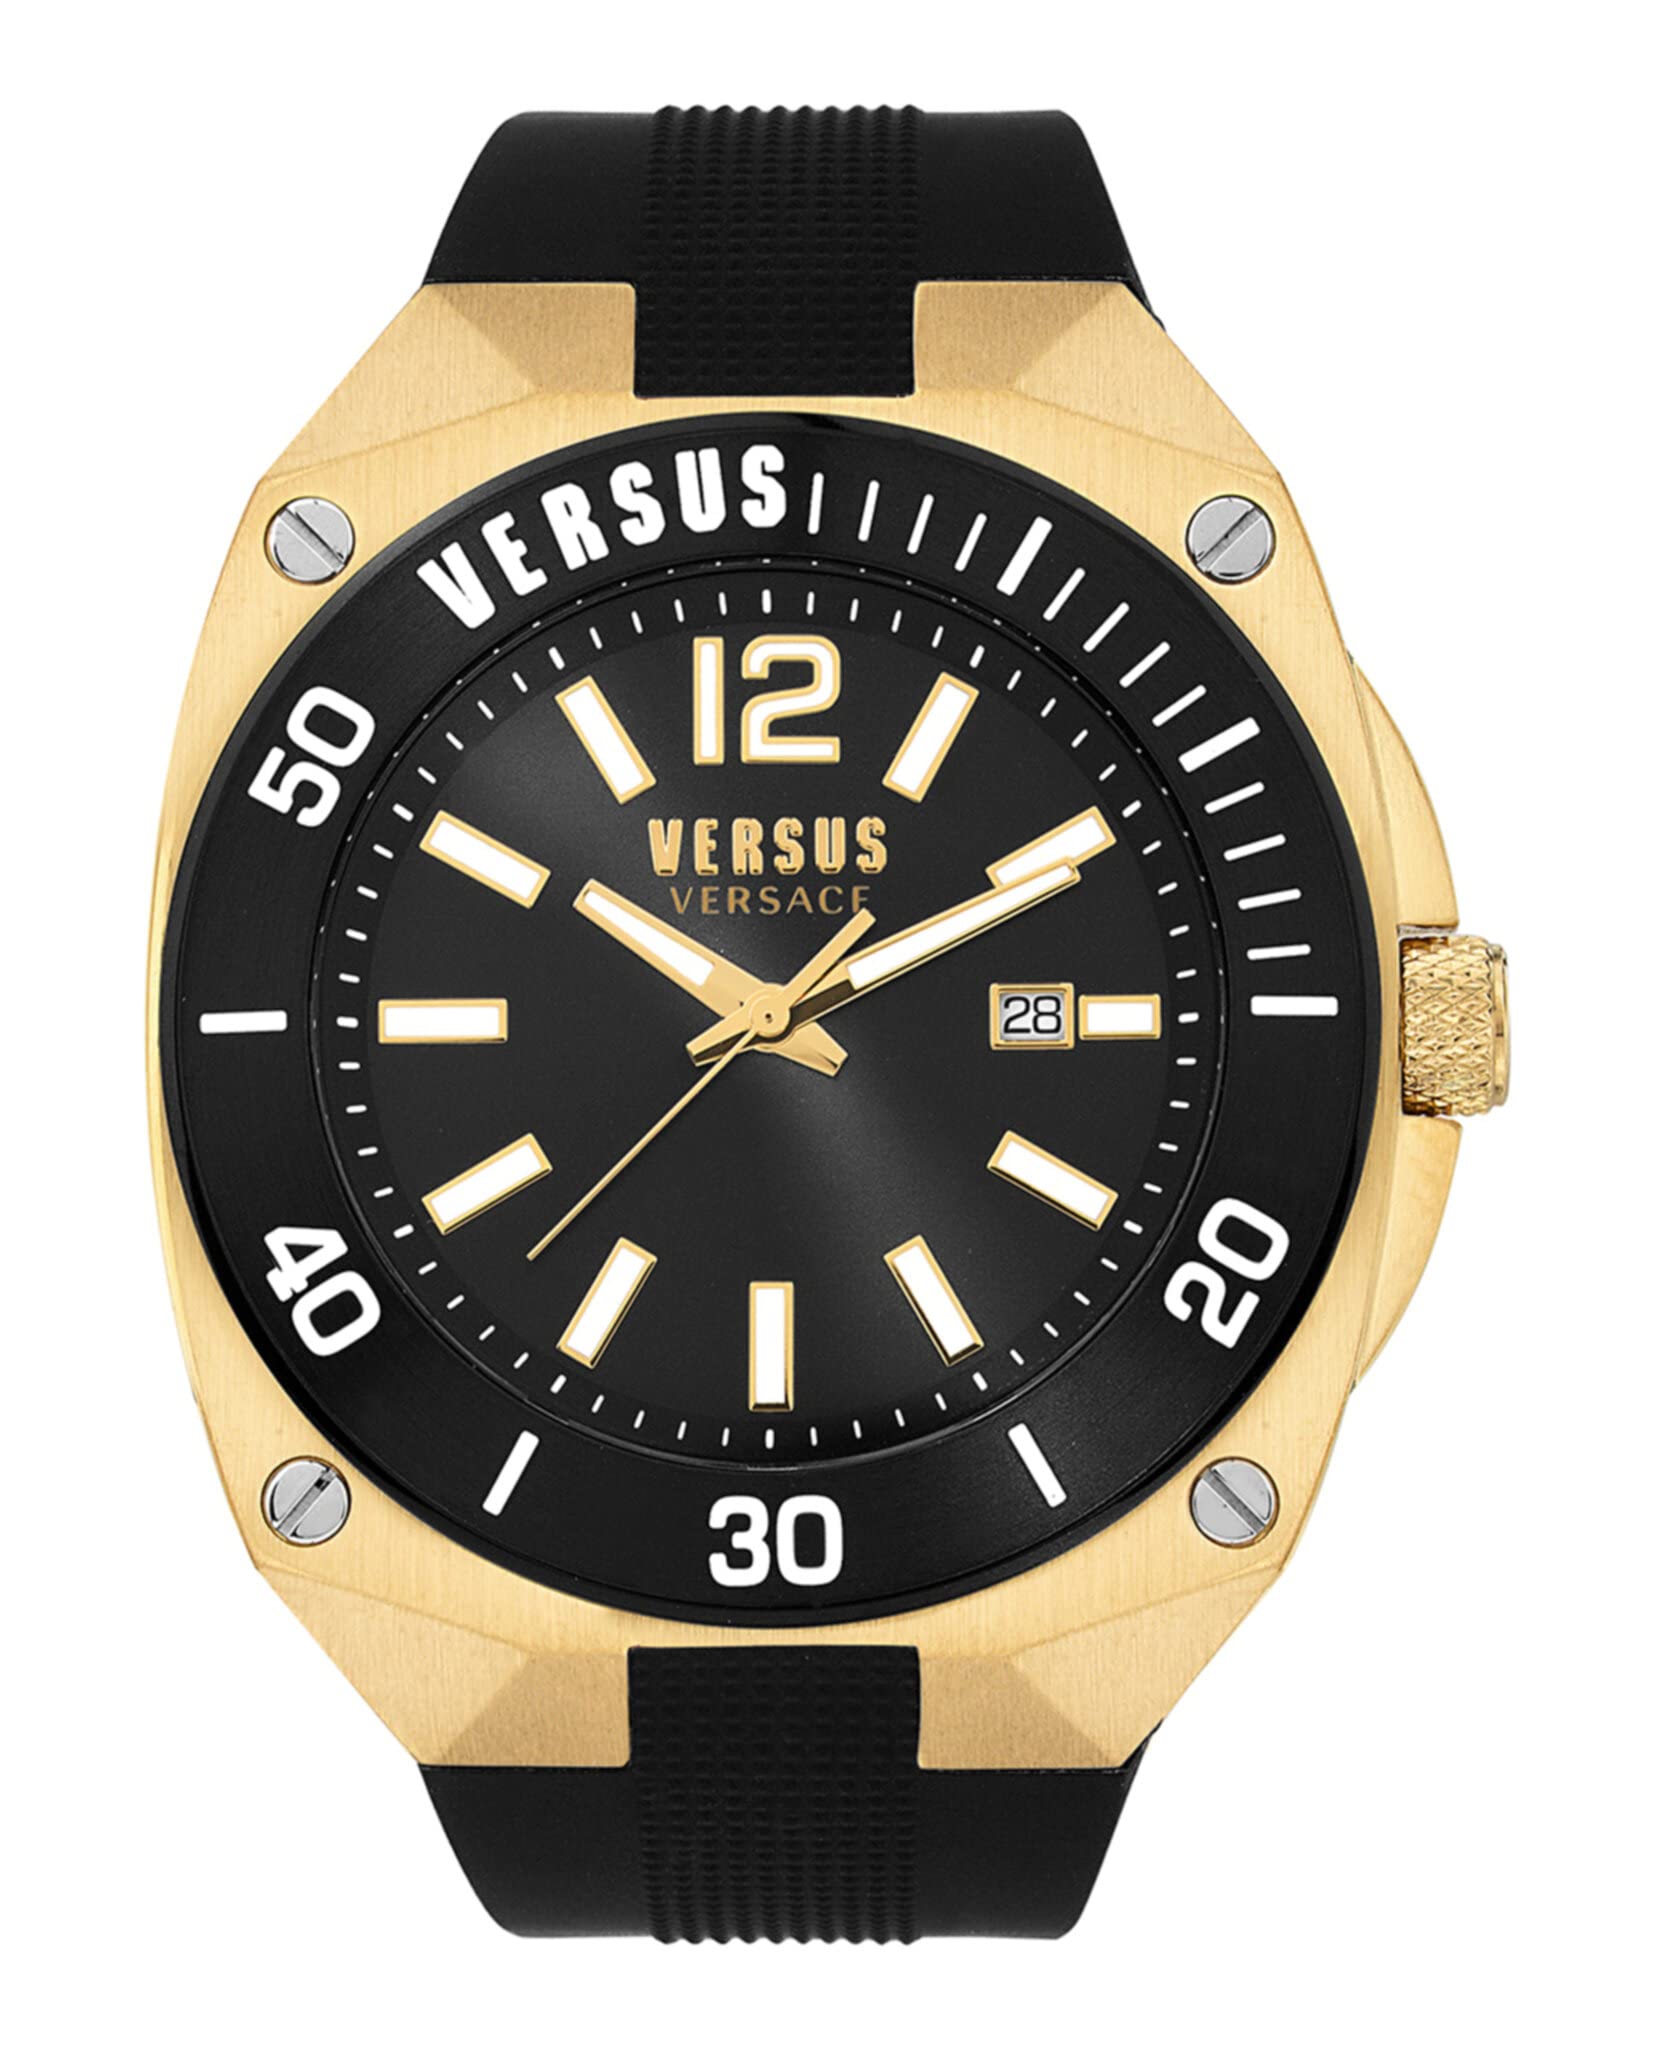 Versus Versace Versus Reaction Collection Luxury Mens Watch Timepiece with a Black Strap Featuring a Gold Case and Black Dial